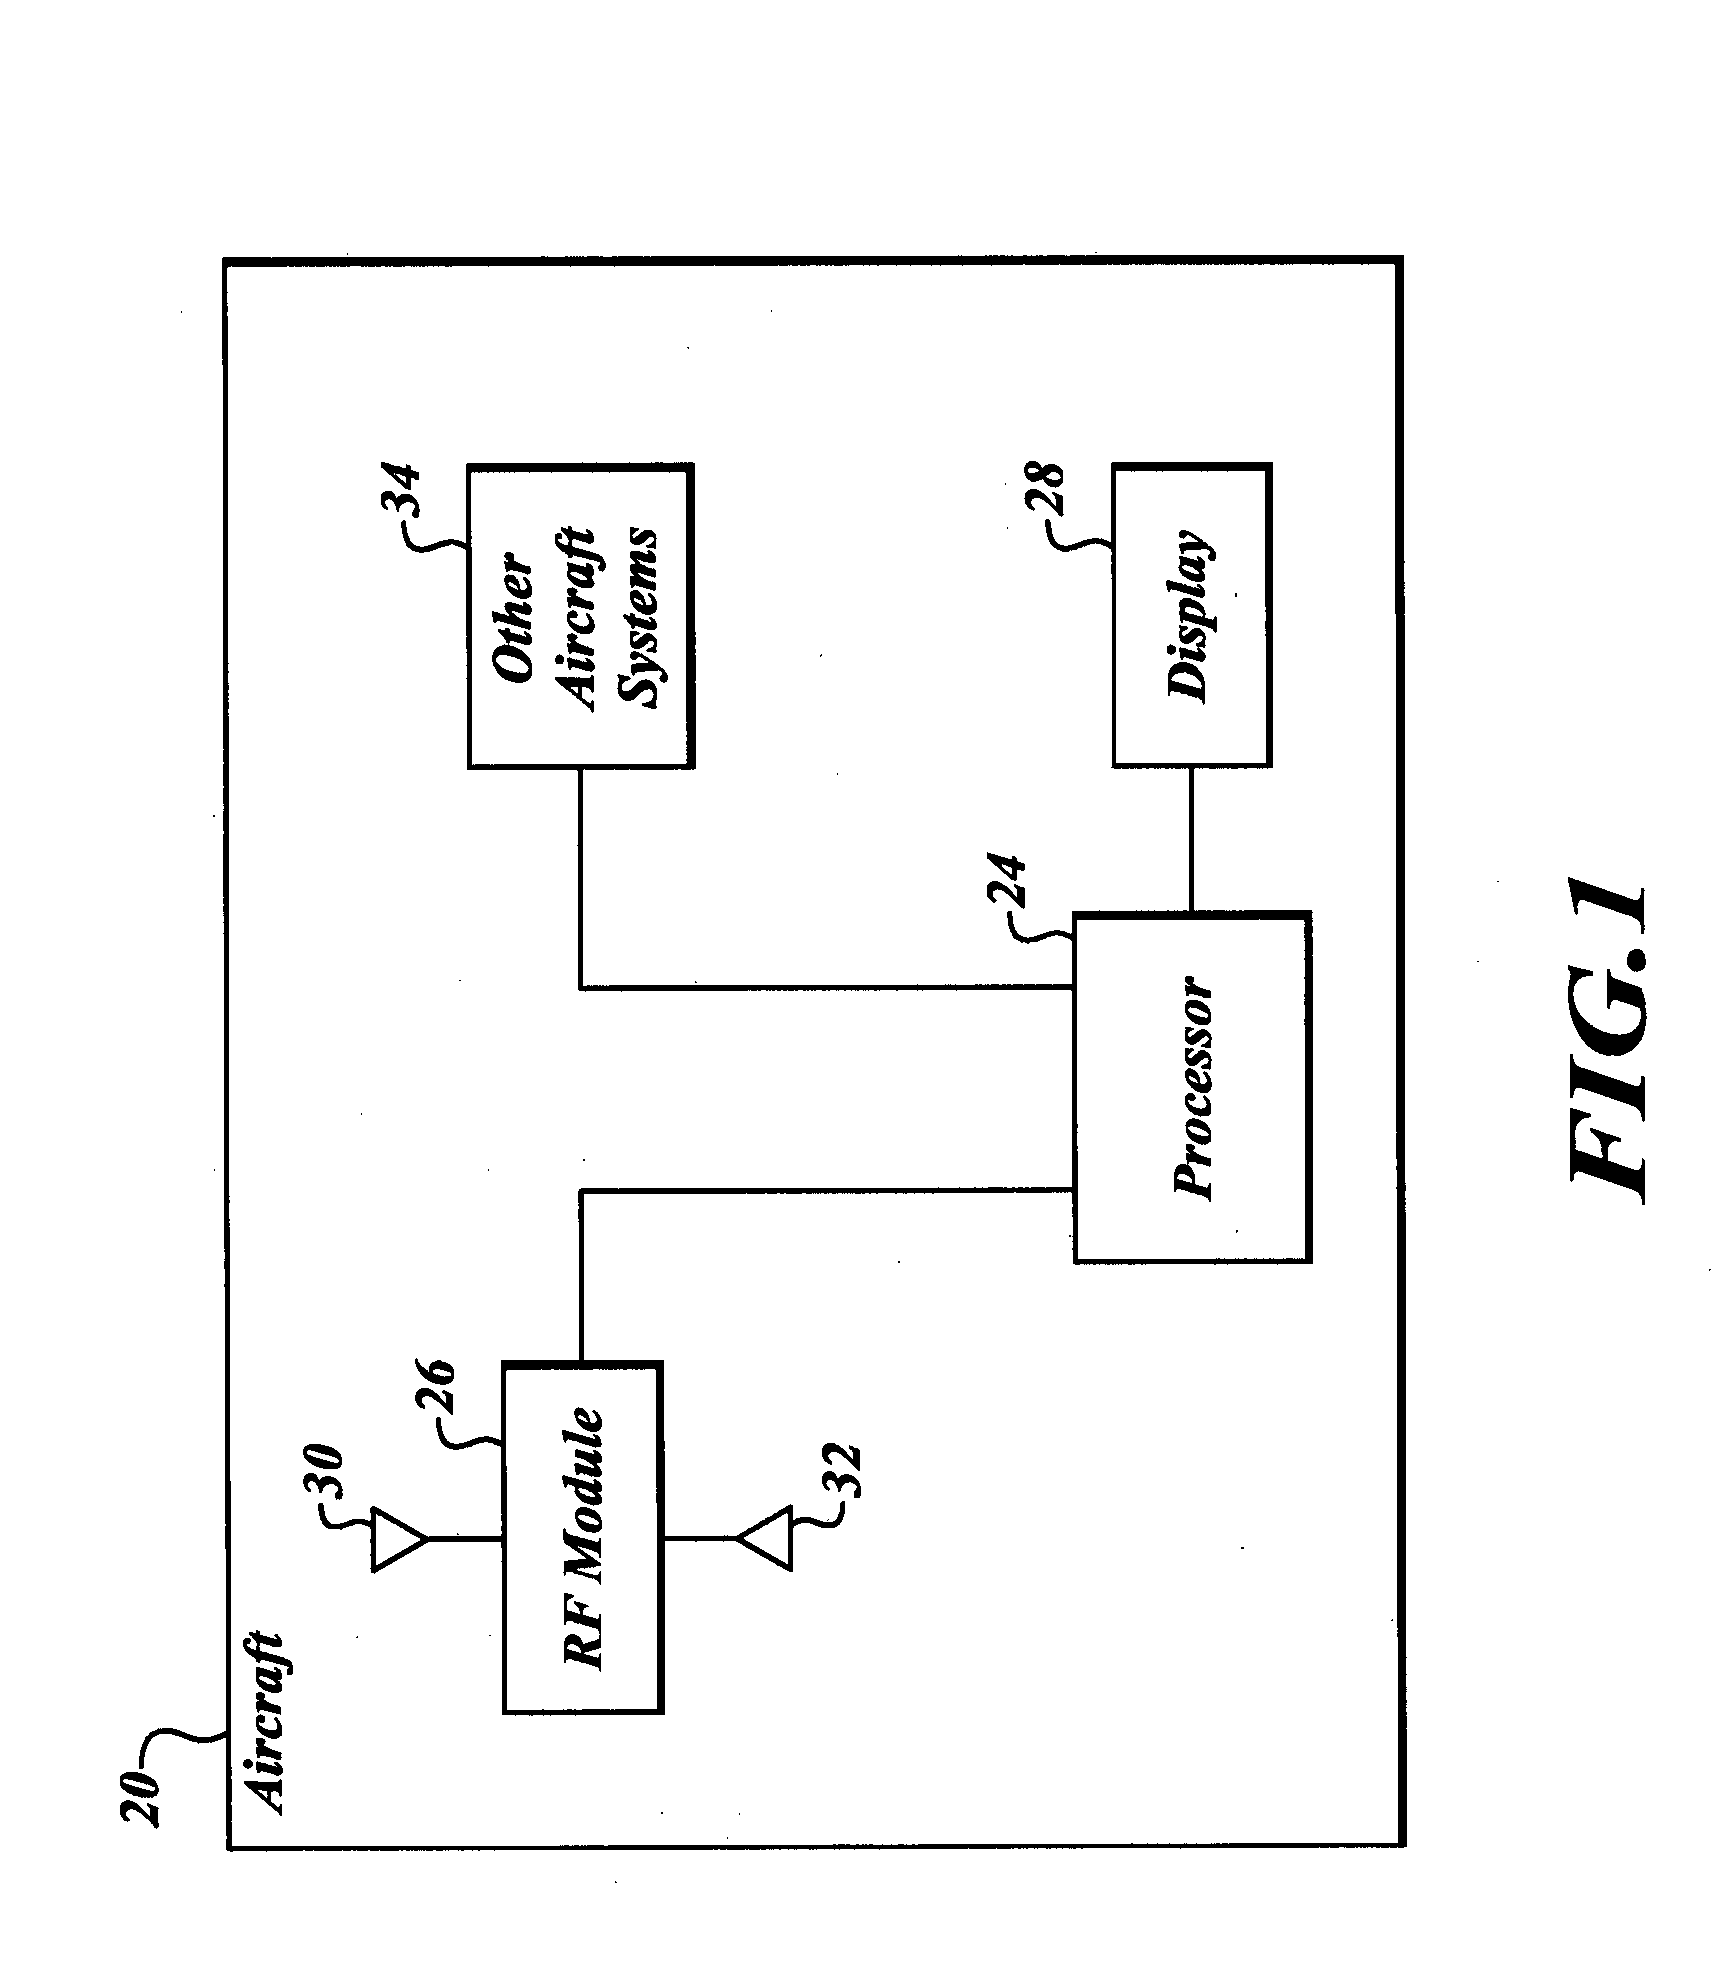 Systems and methods for providing improved tcas bearing measurement